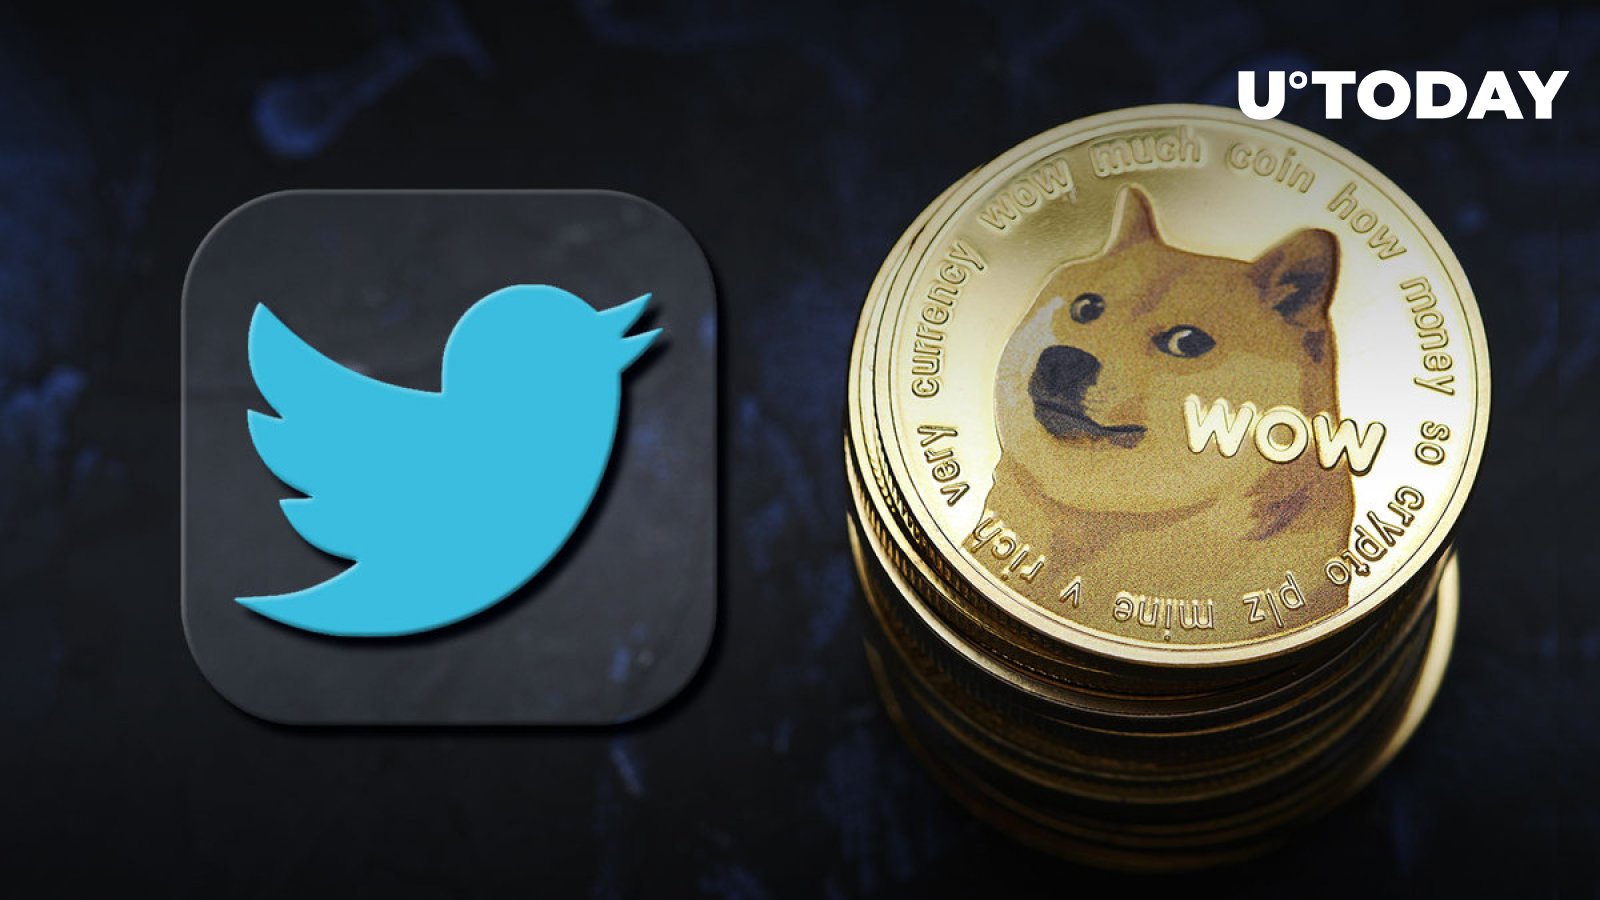 DOGE Co-Founder Says He Sees Less Spam Bots, Assumes Twitter’s Done Something